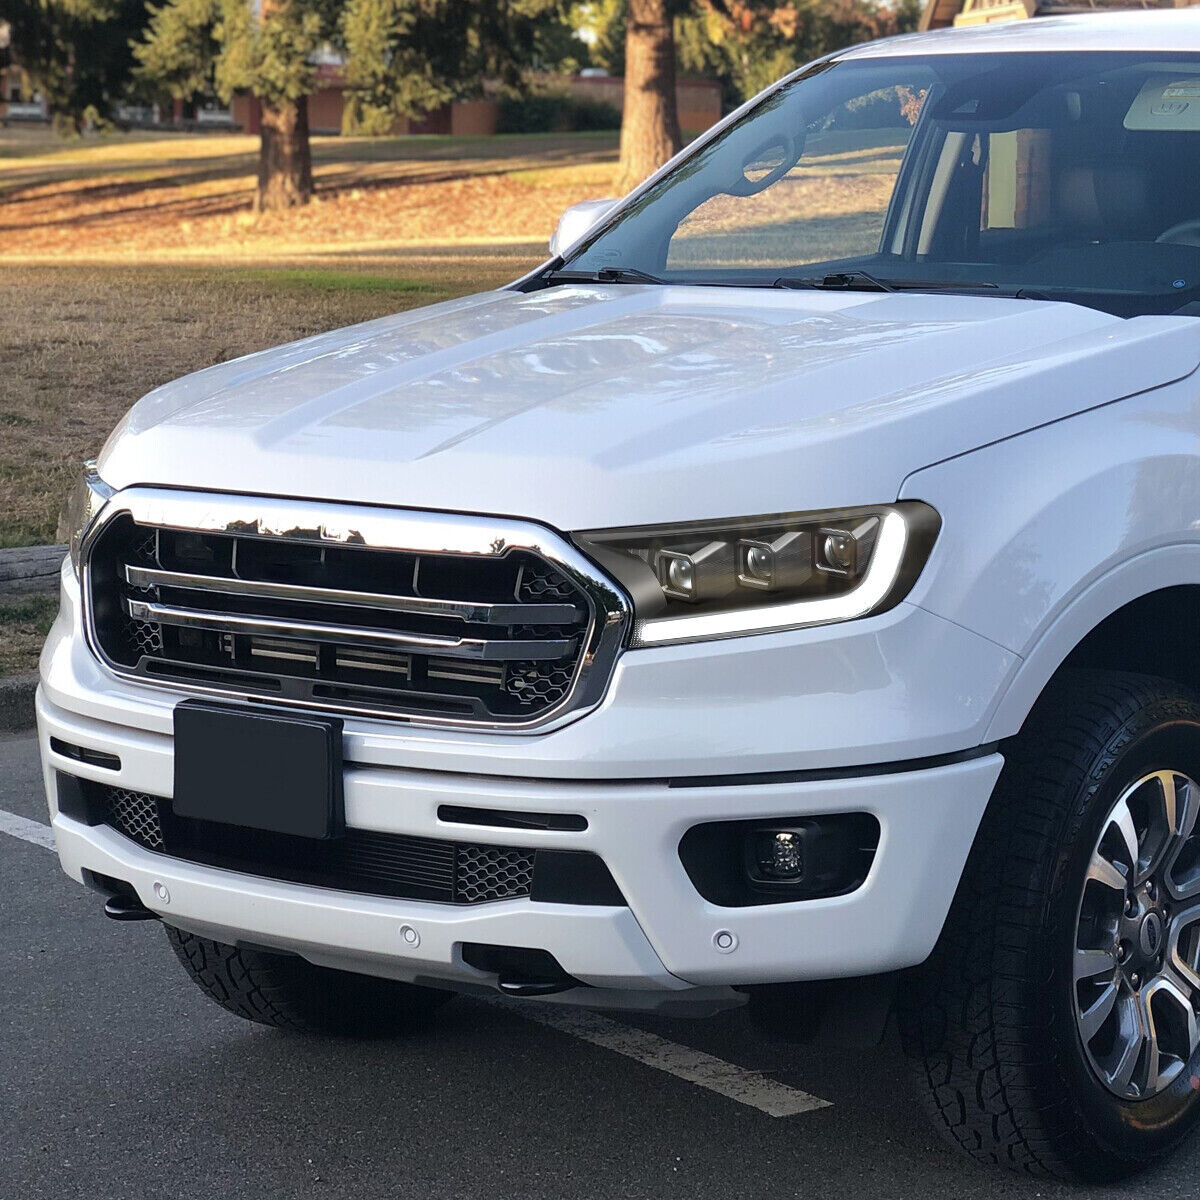 2019-2022 Ford Ranger Projector Sequential Bar Style Headlights